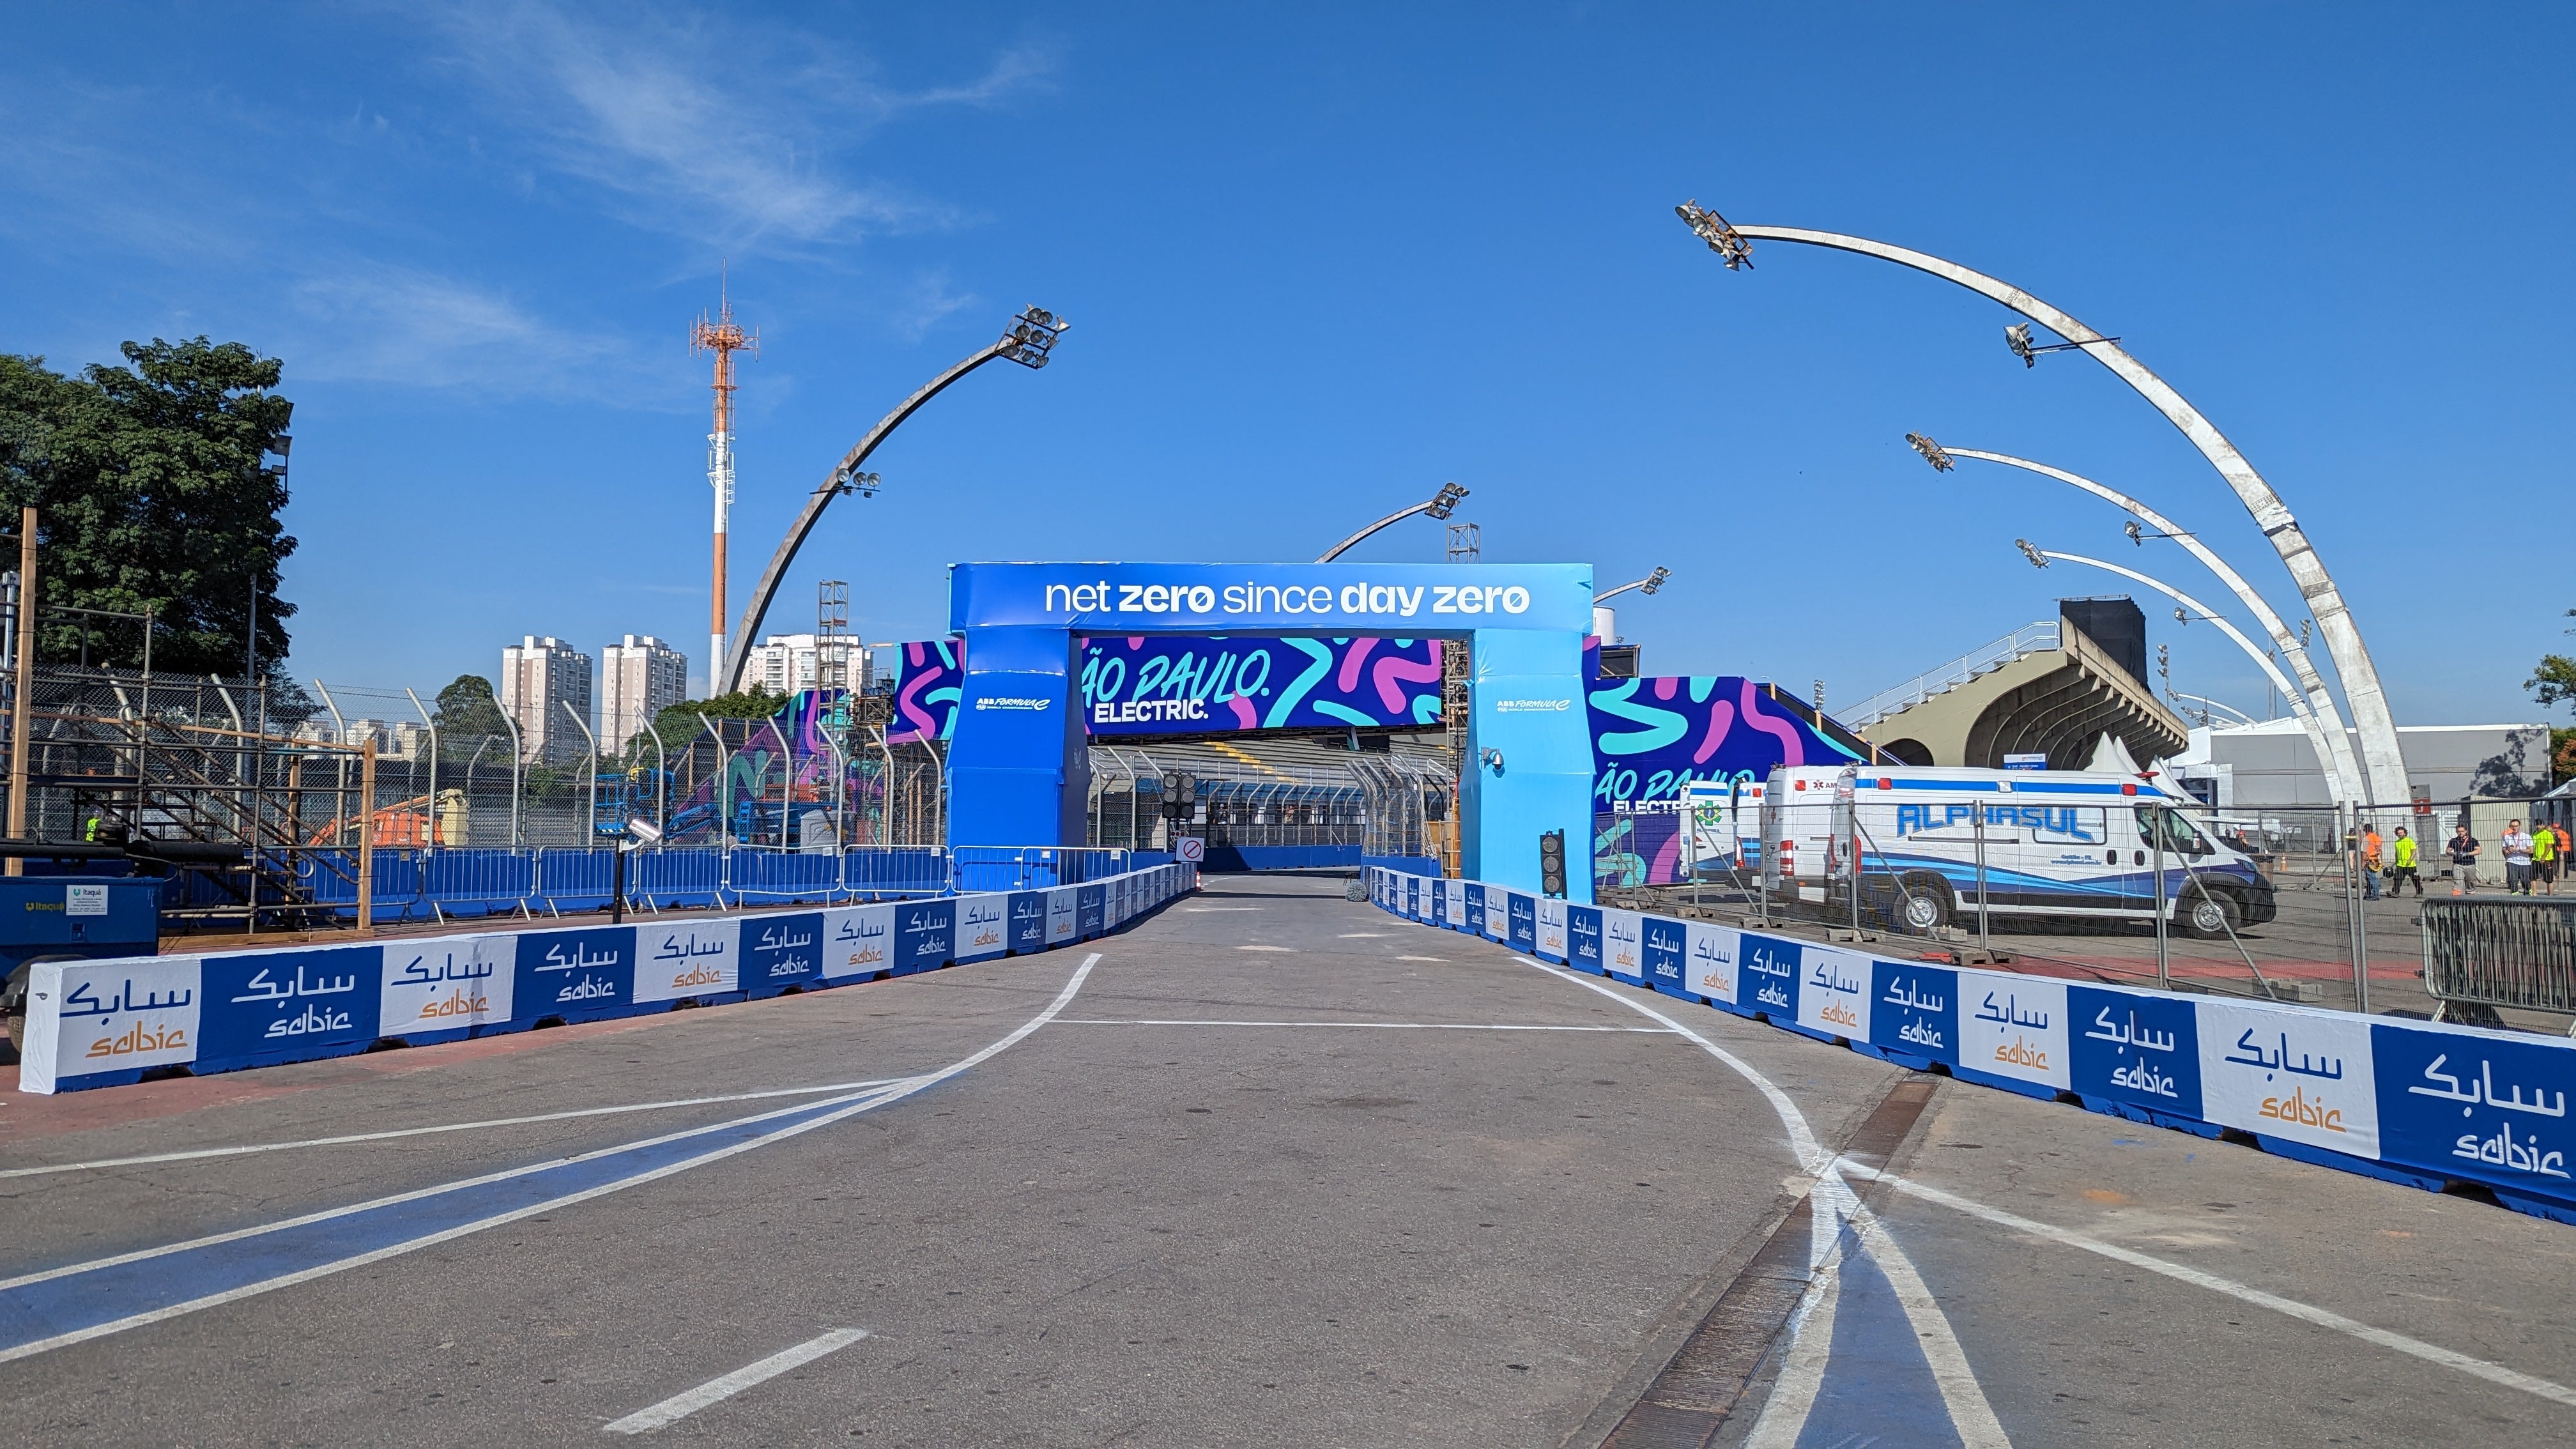 The streets of Sao Paulo host a Formula E race for the first time this weekend